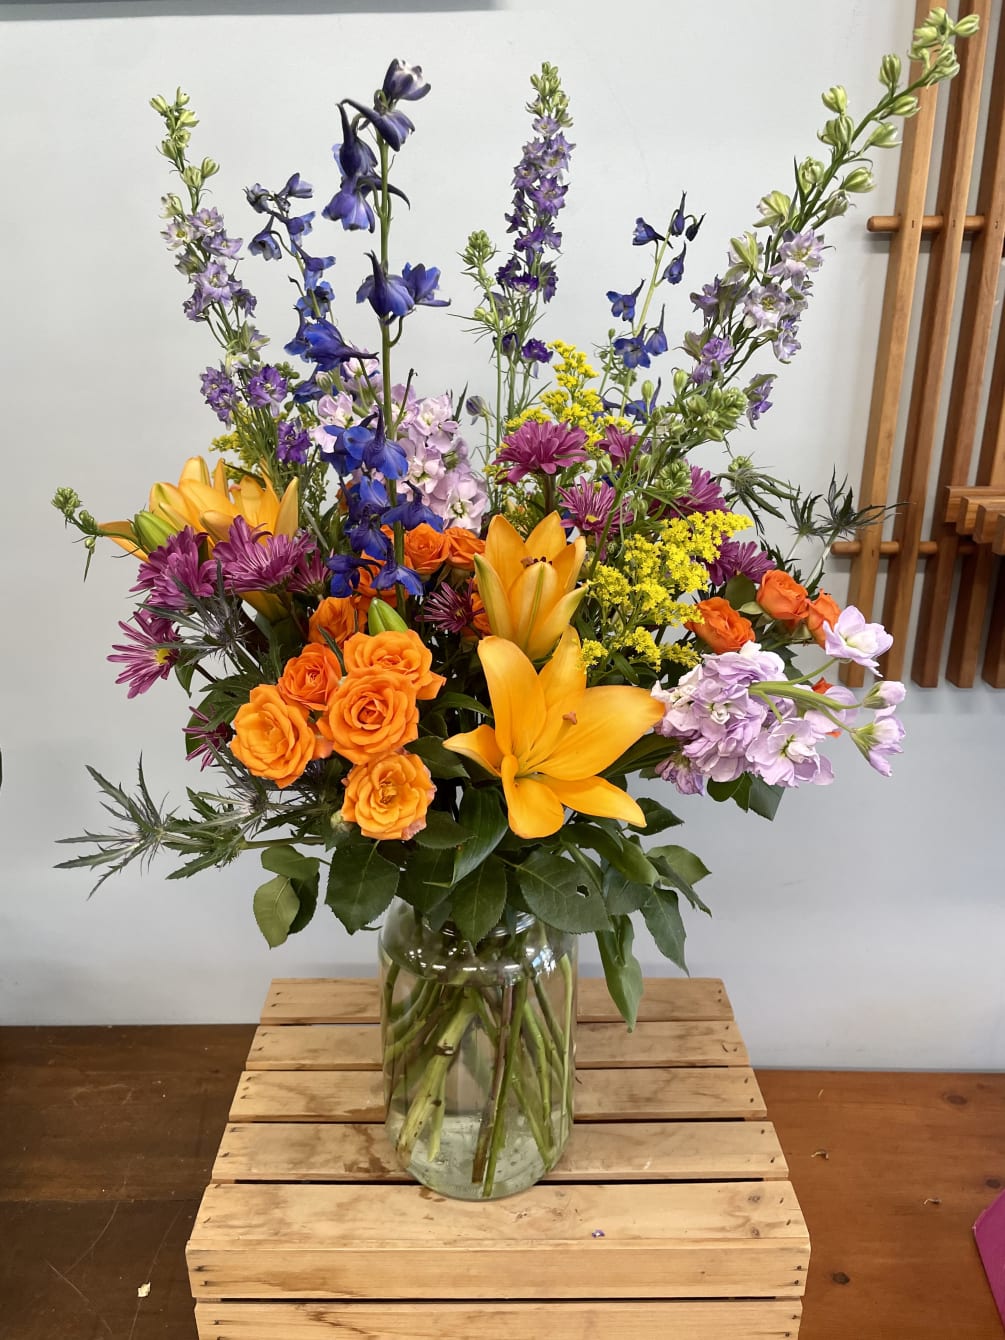 Bright and bold, this summer medley arrives looking straight from the garden.